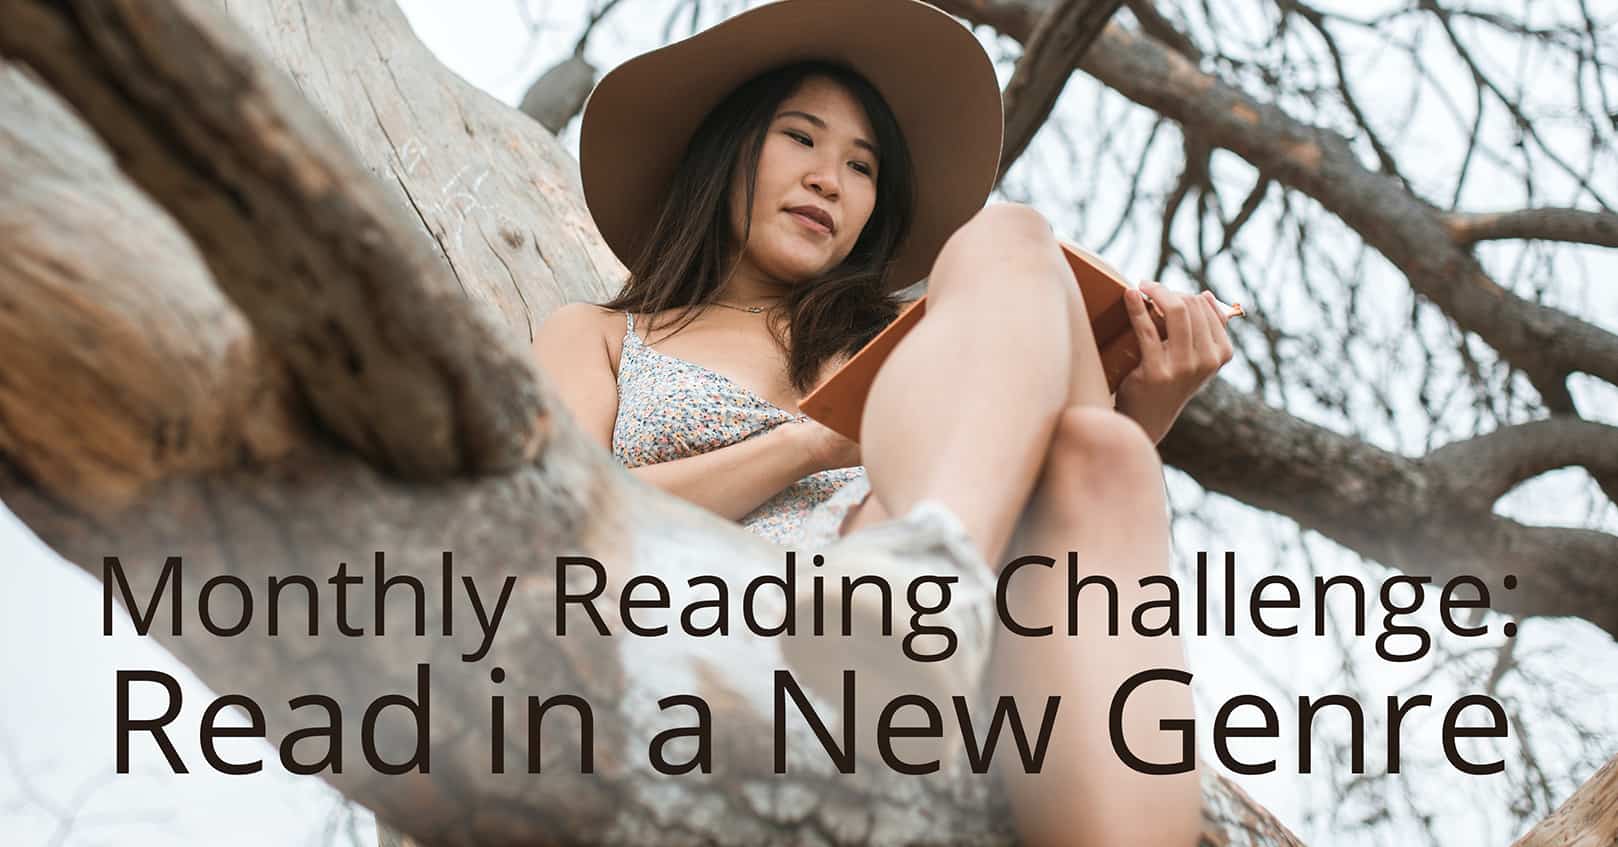 monthly reading challenge - read a new genre